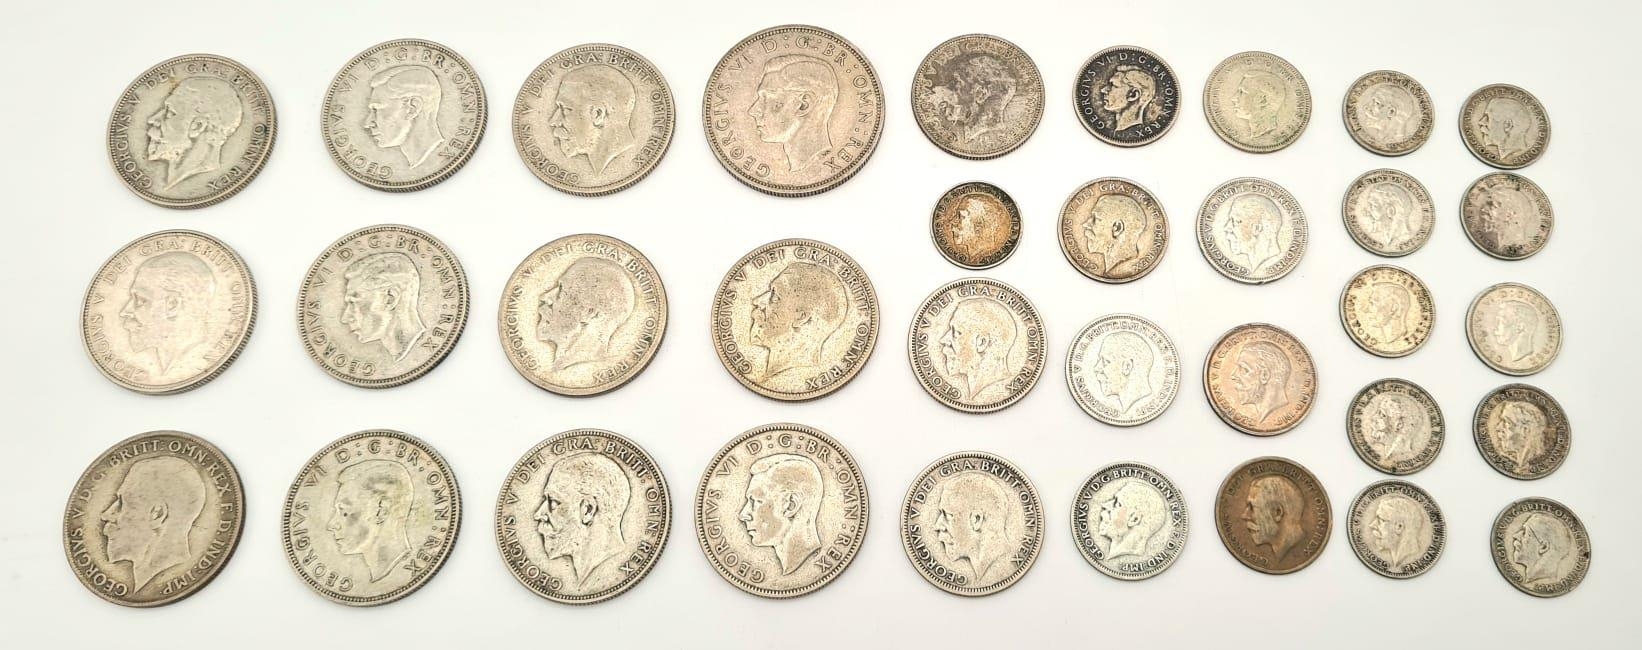 A Selection of Vintage Silver (.500) English Coins. Please see photos for conditions. 185g total - Image 8 of 8